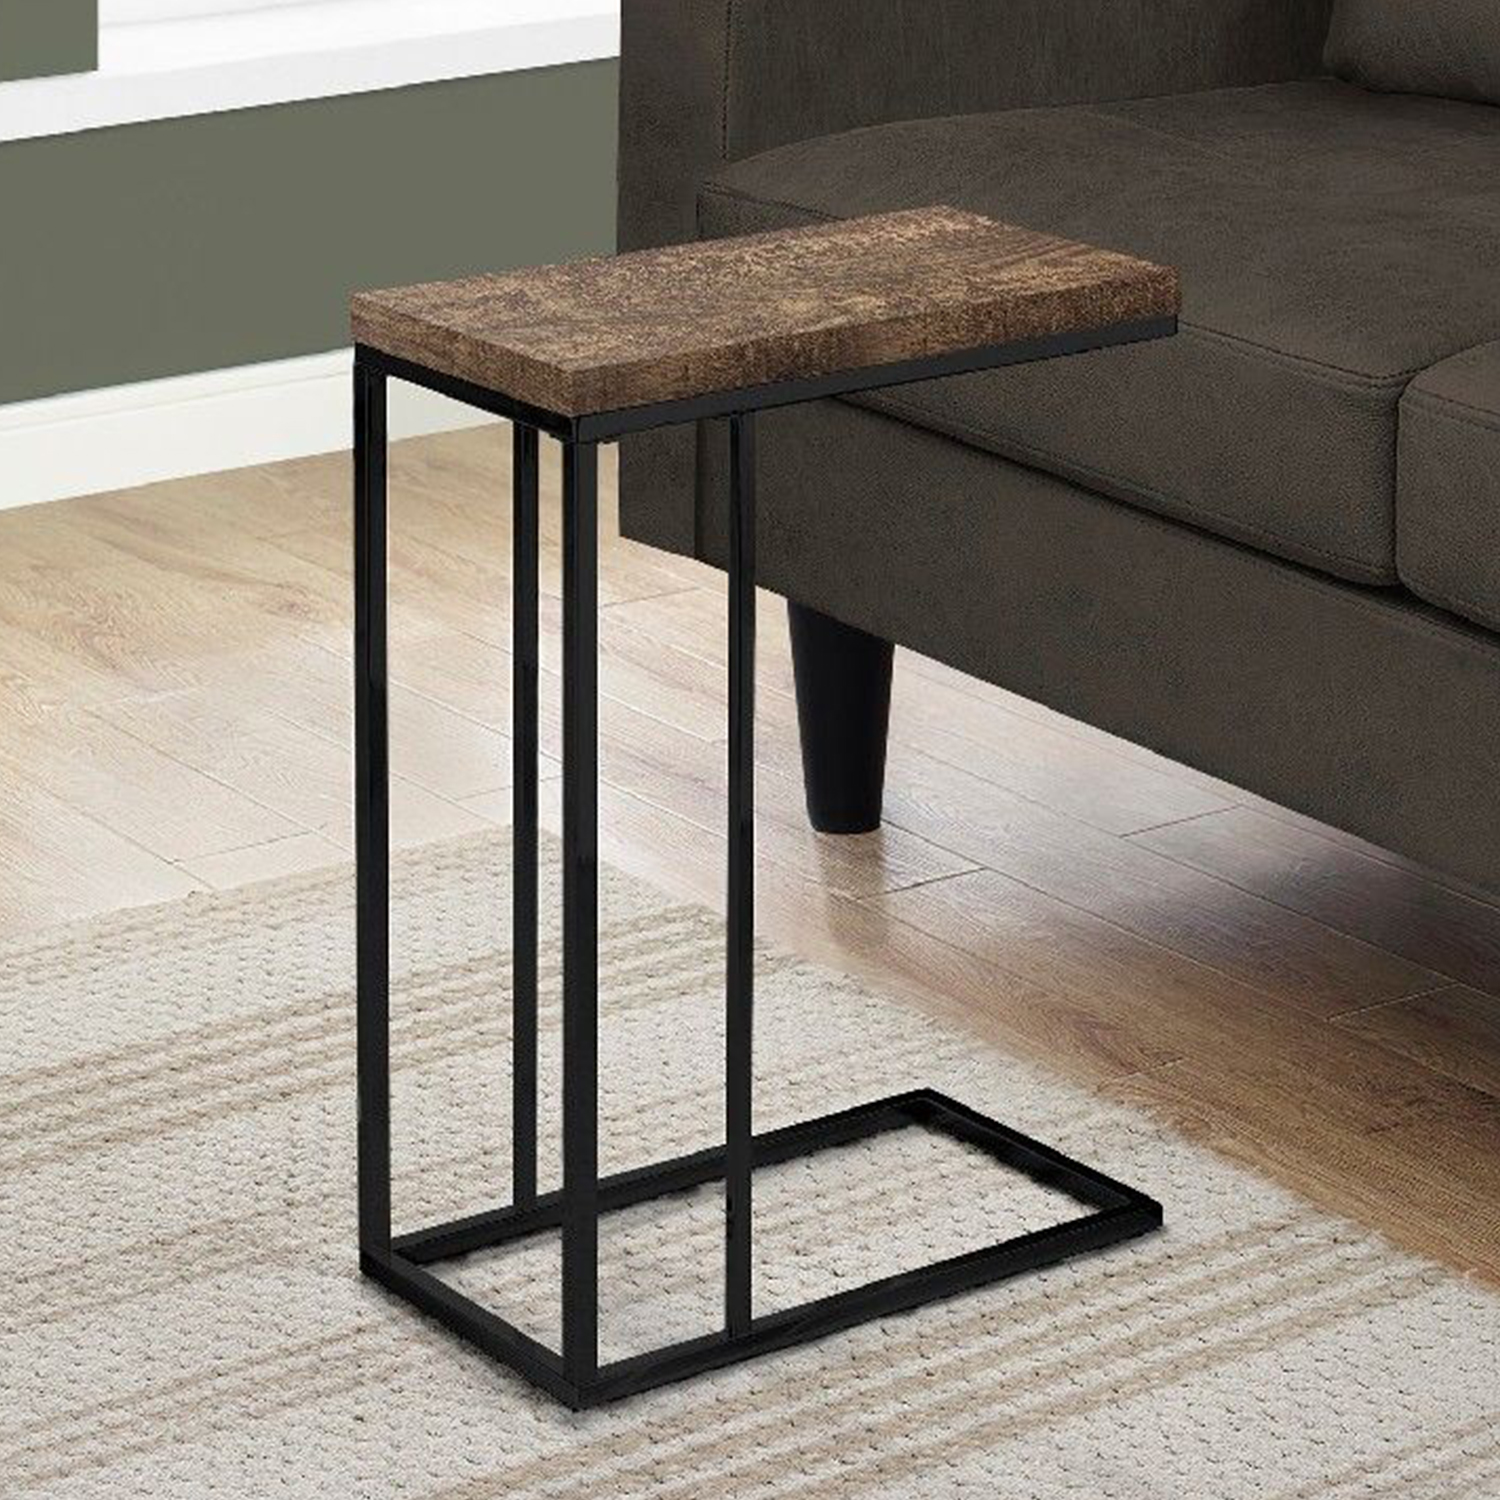 18.25" x 10.25" x 25.25" BrownBlack Particle Board Metal Accent Table